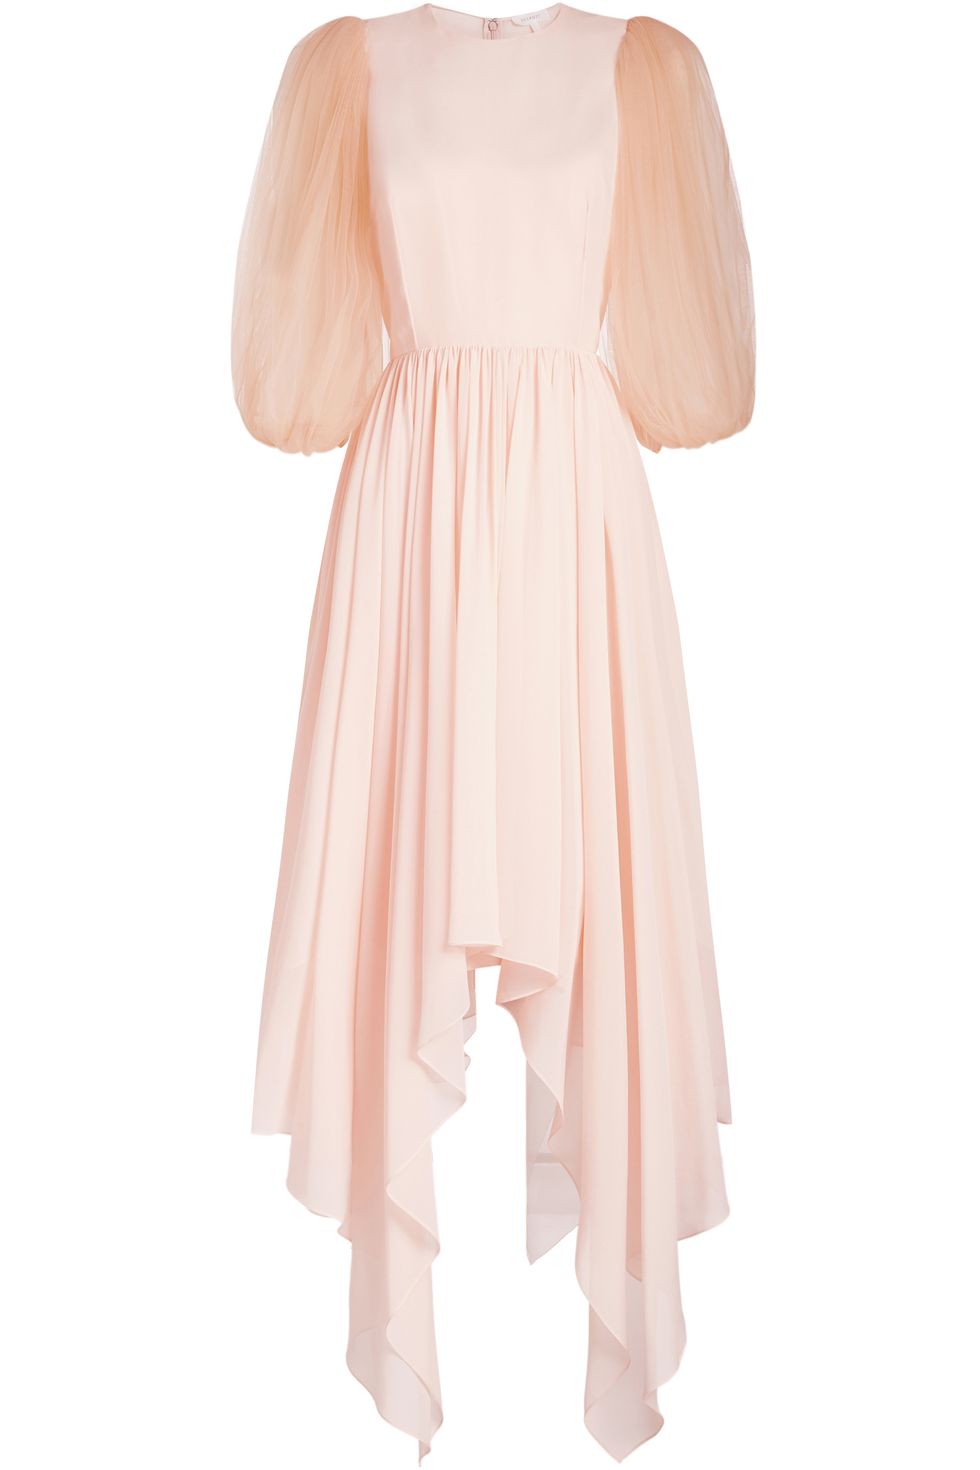 Clothing, Dress, White, Pink, Day dress, Sleeve, Shoulder, Beige, Gown, Neck, 